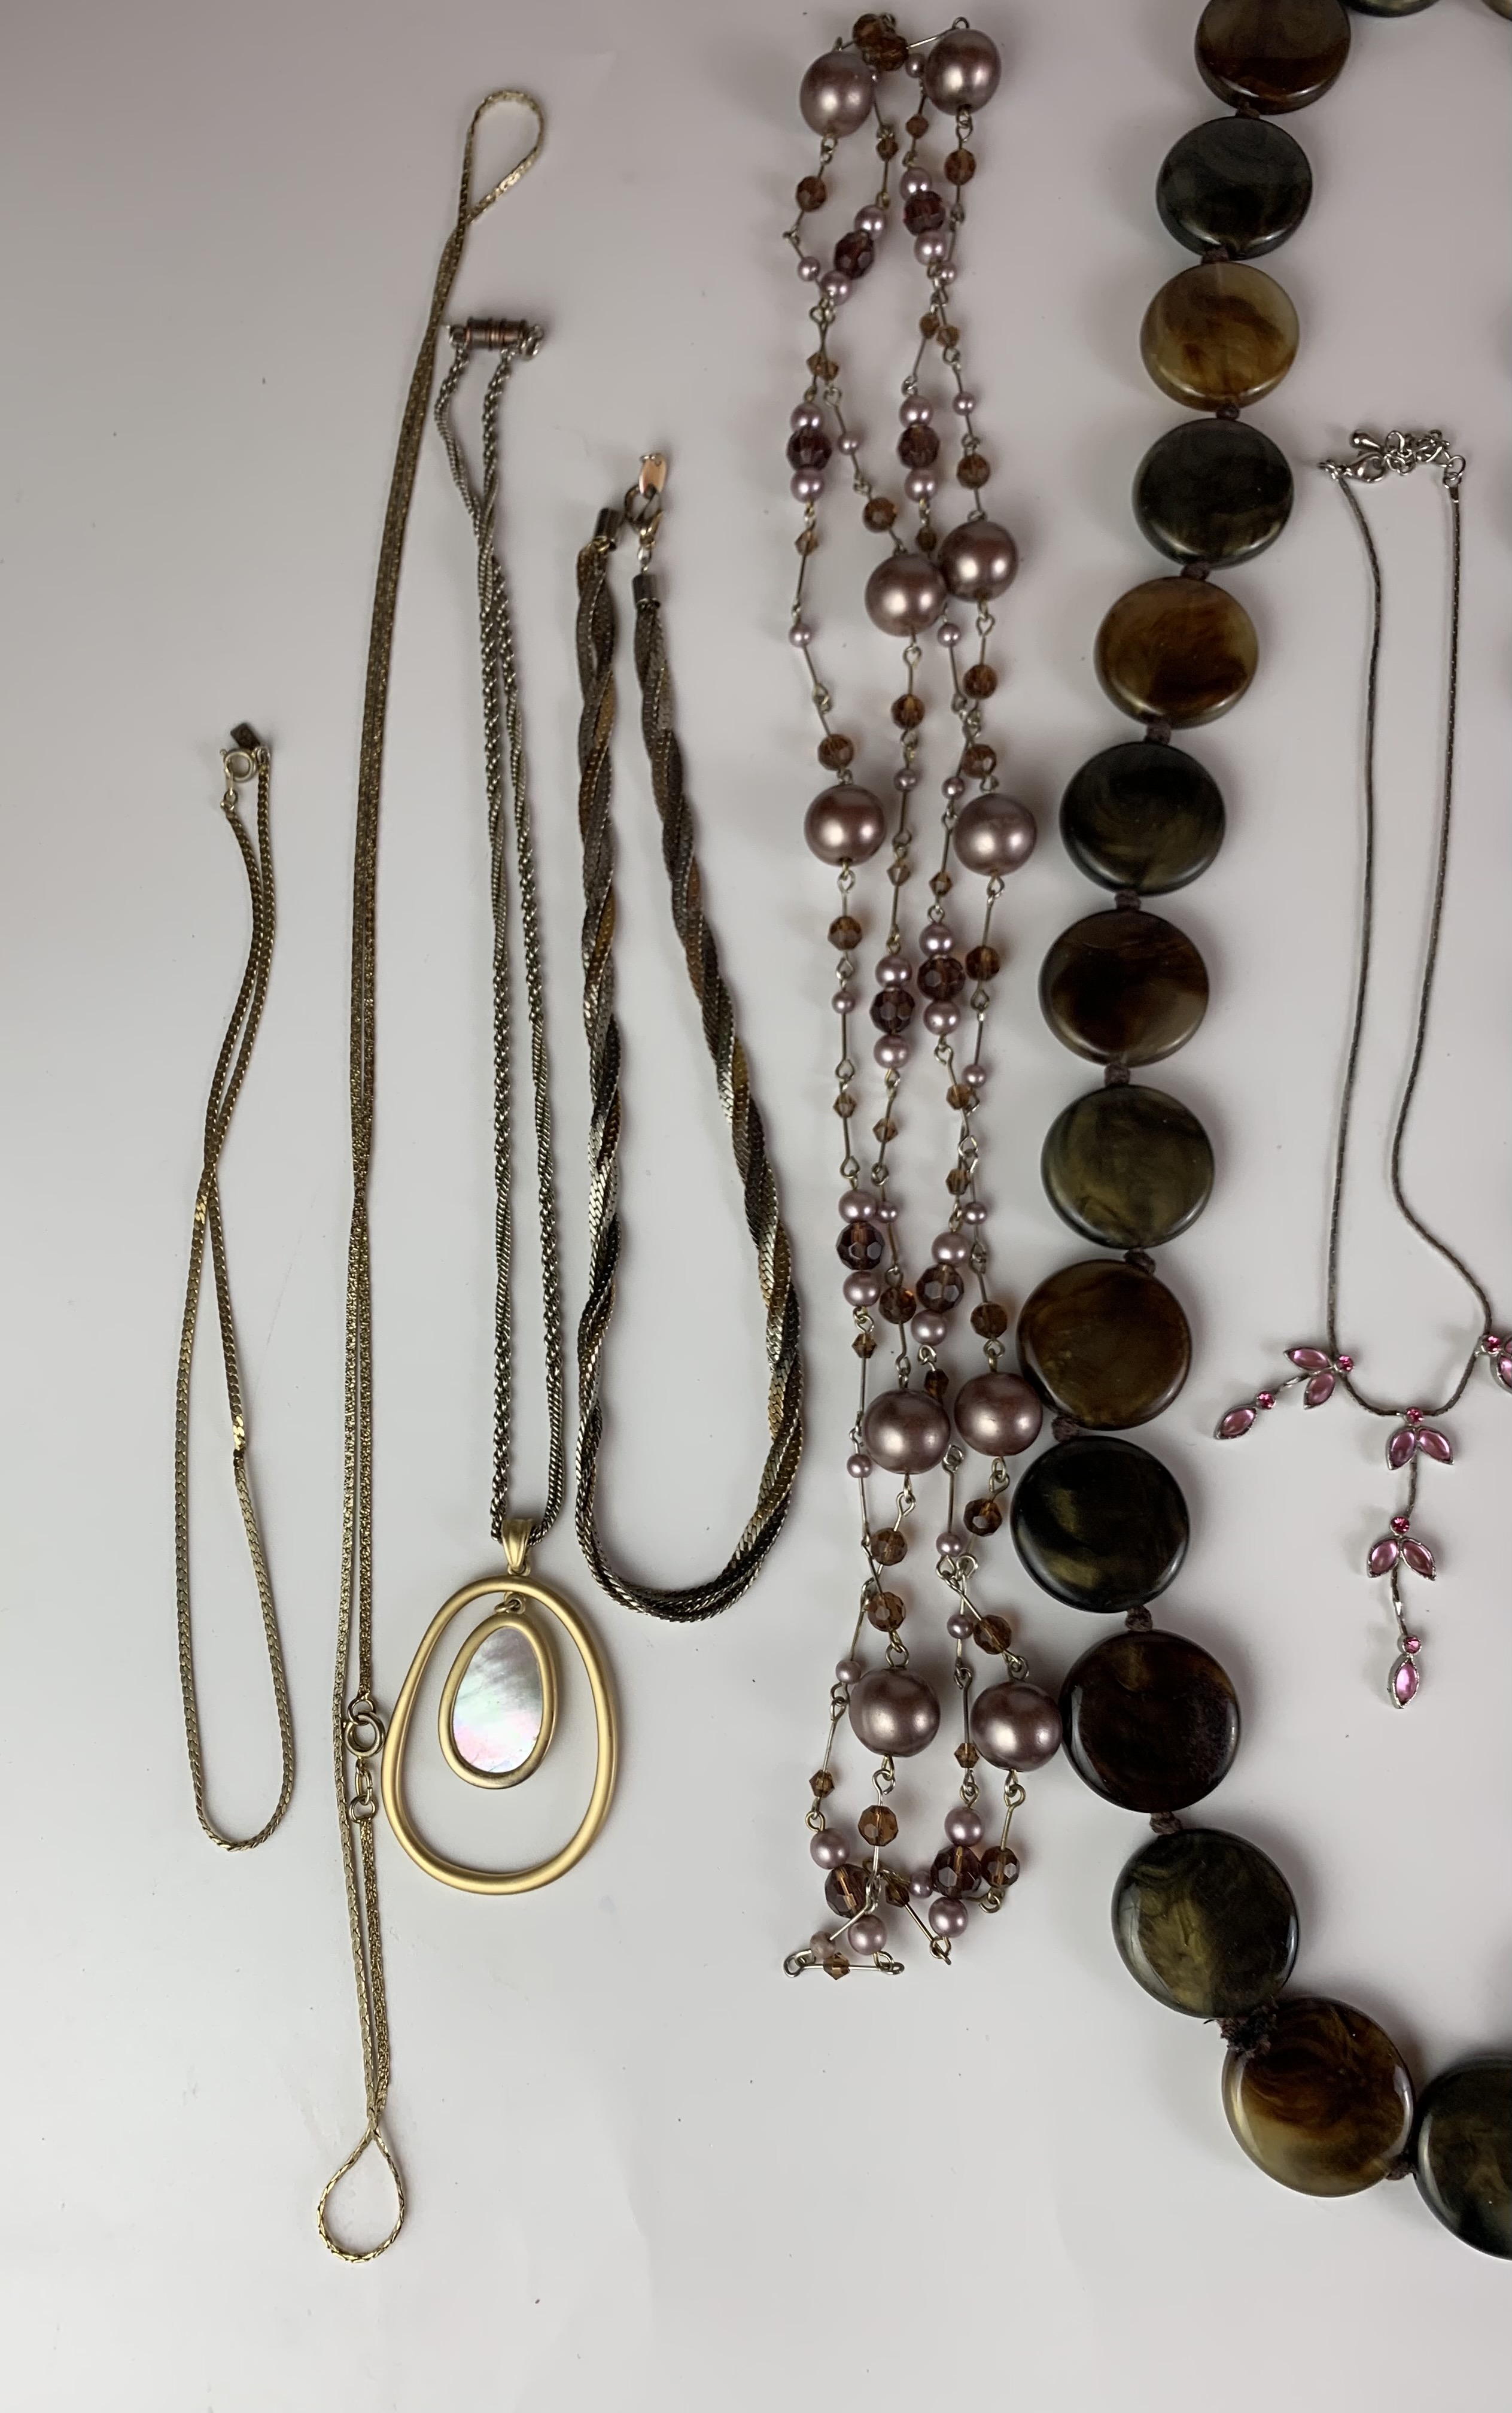 Dress jewellery including necklaces, beads, bracelets, rings etc. - Image 4 of 14